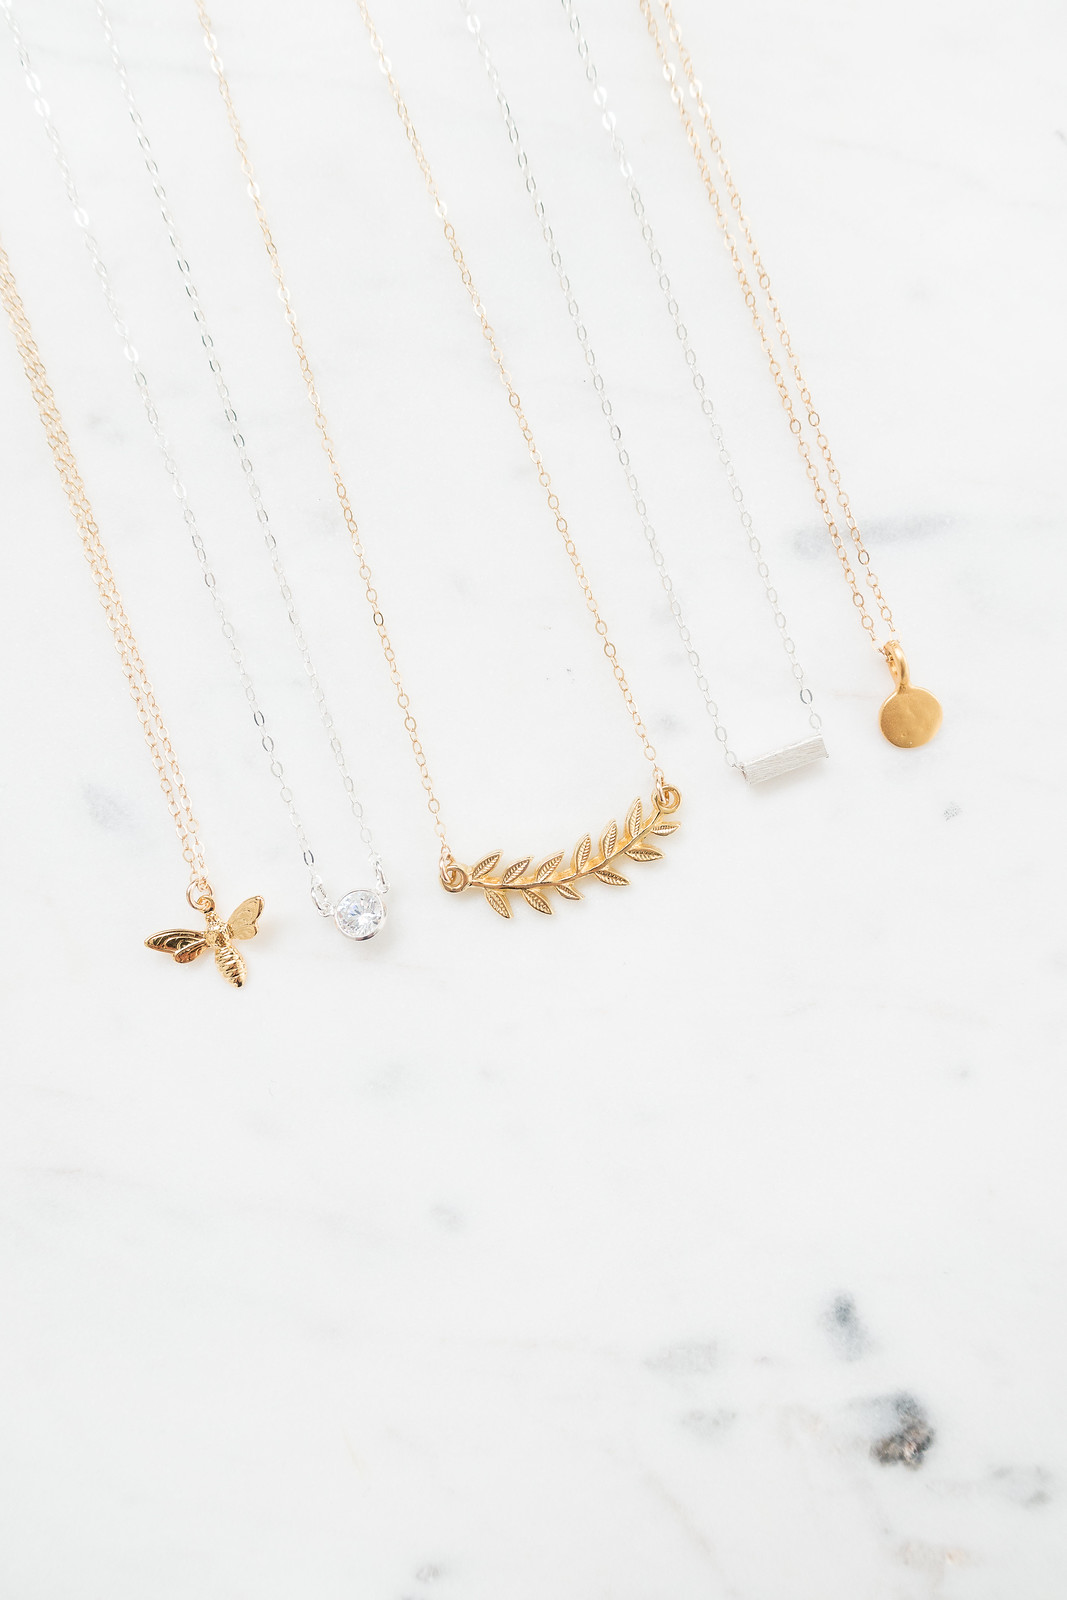 A Jewellery Capsule Collection